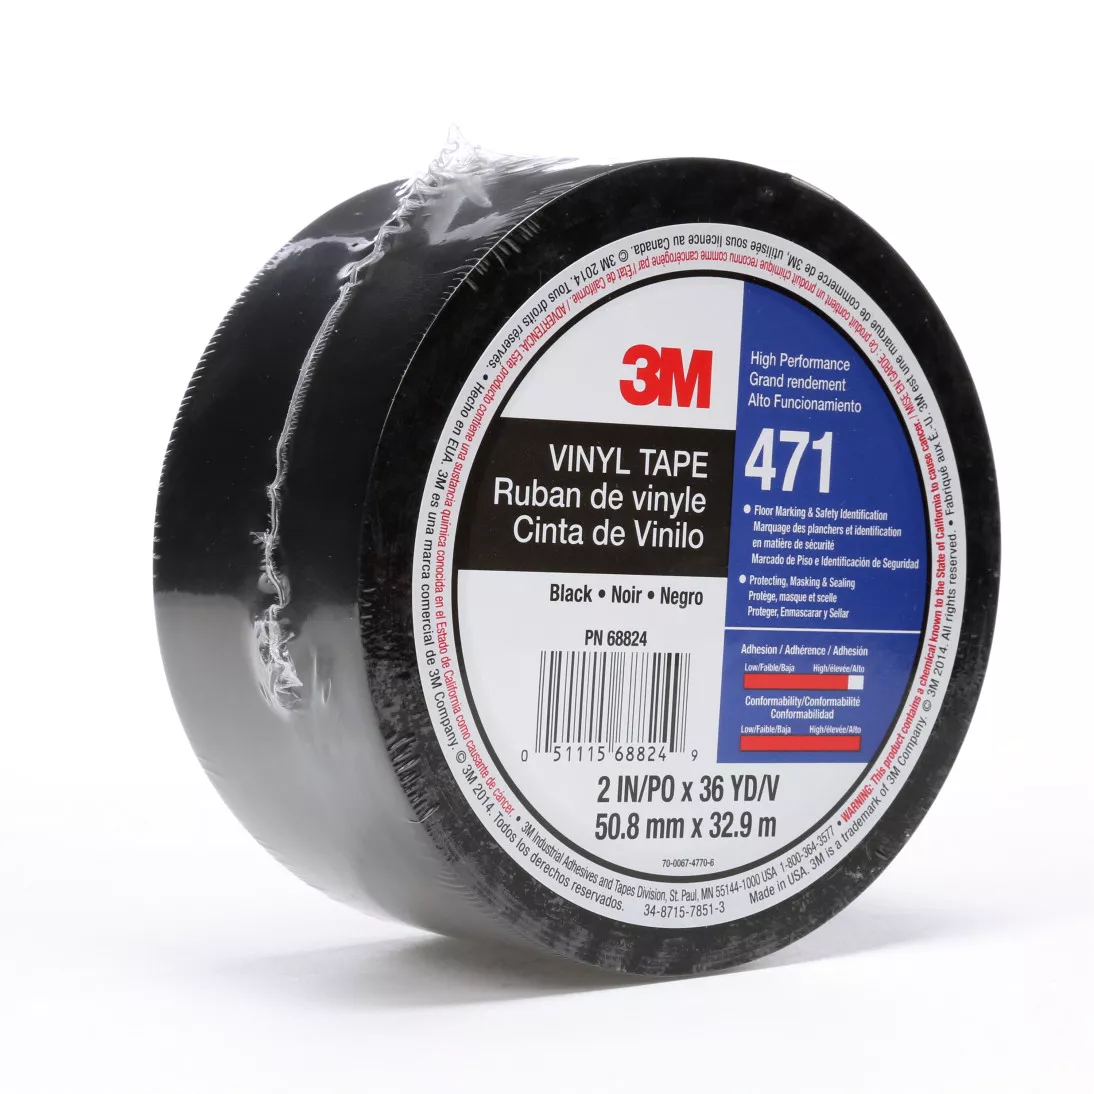 3M™ Vinyl Tape 471, Black, 1 in x 36 yd, 5.2 mil, 36 rolls per case,
Individually Wrapped Conveniently Packaged